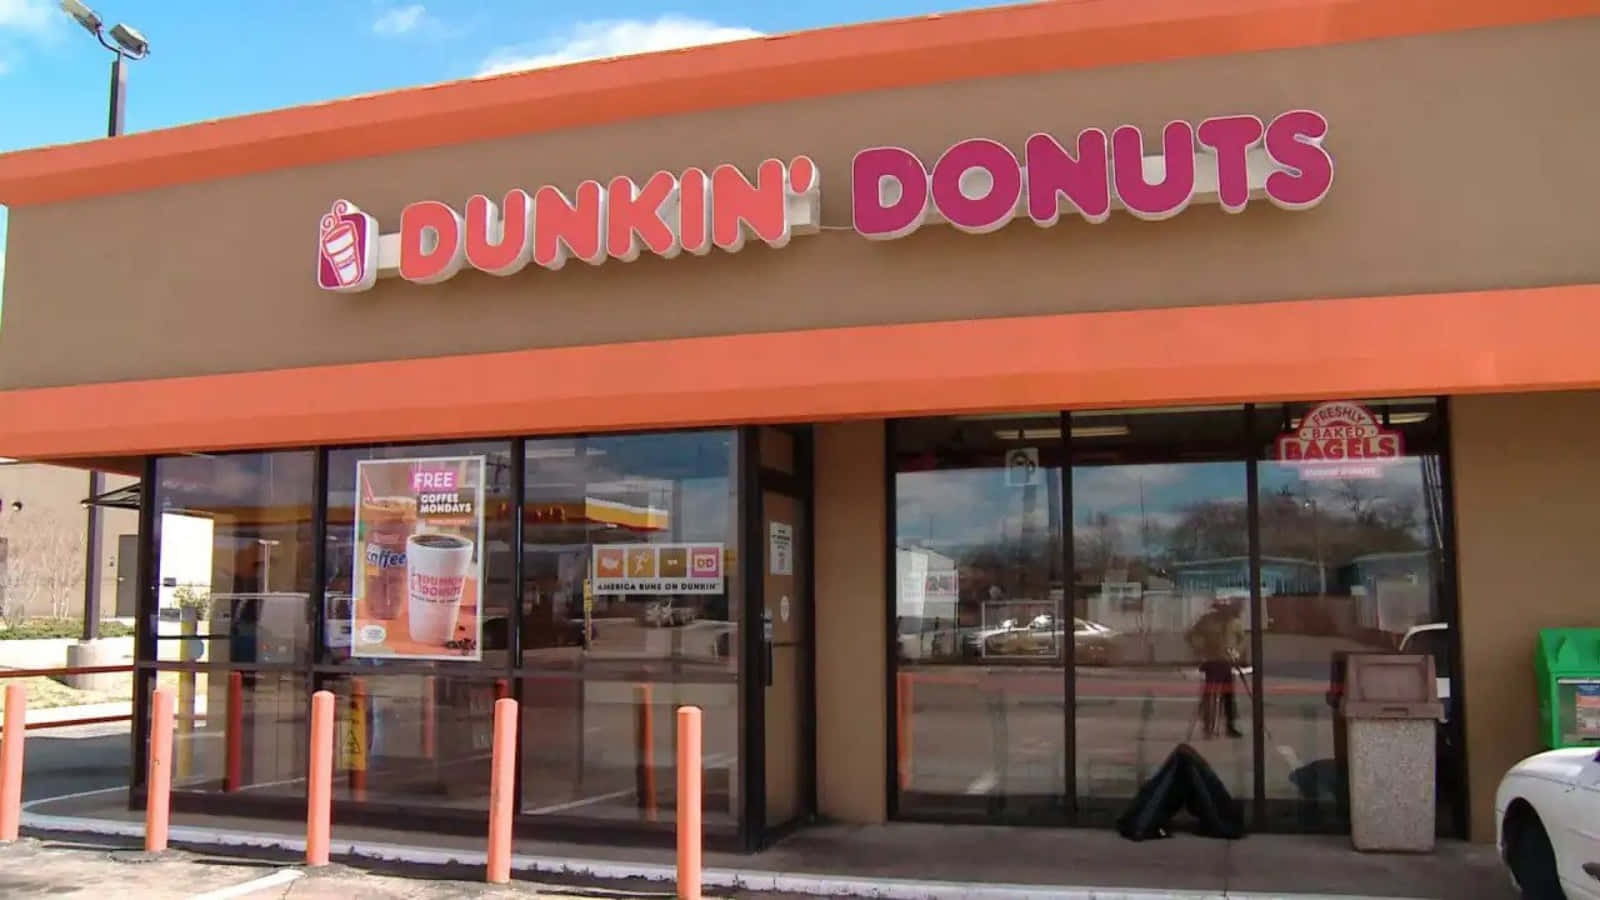 Enjoying a Delicious Dunkin Donuts